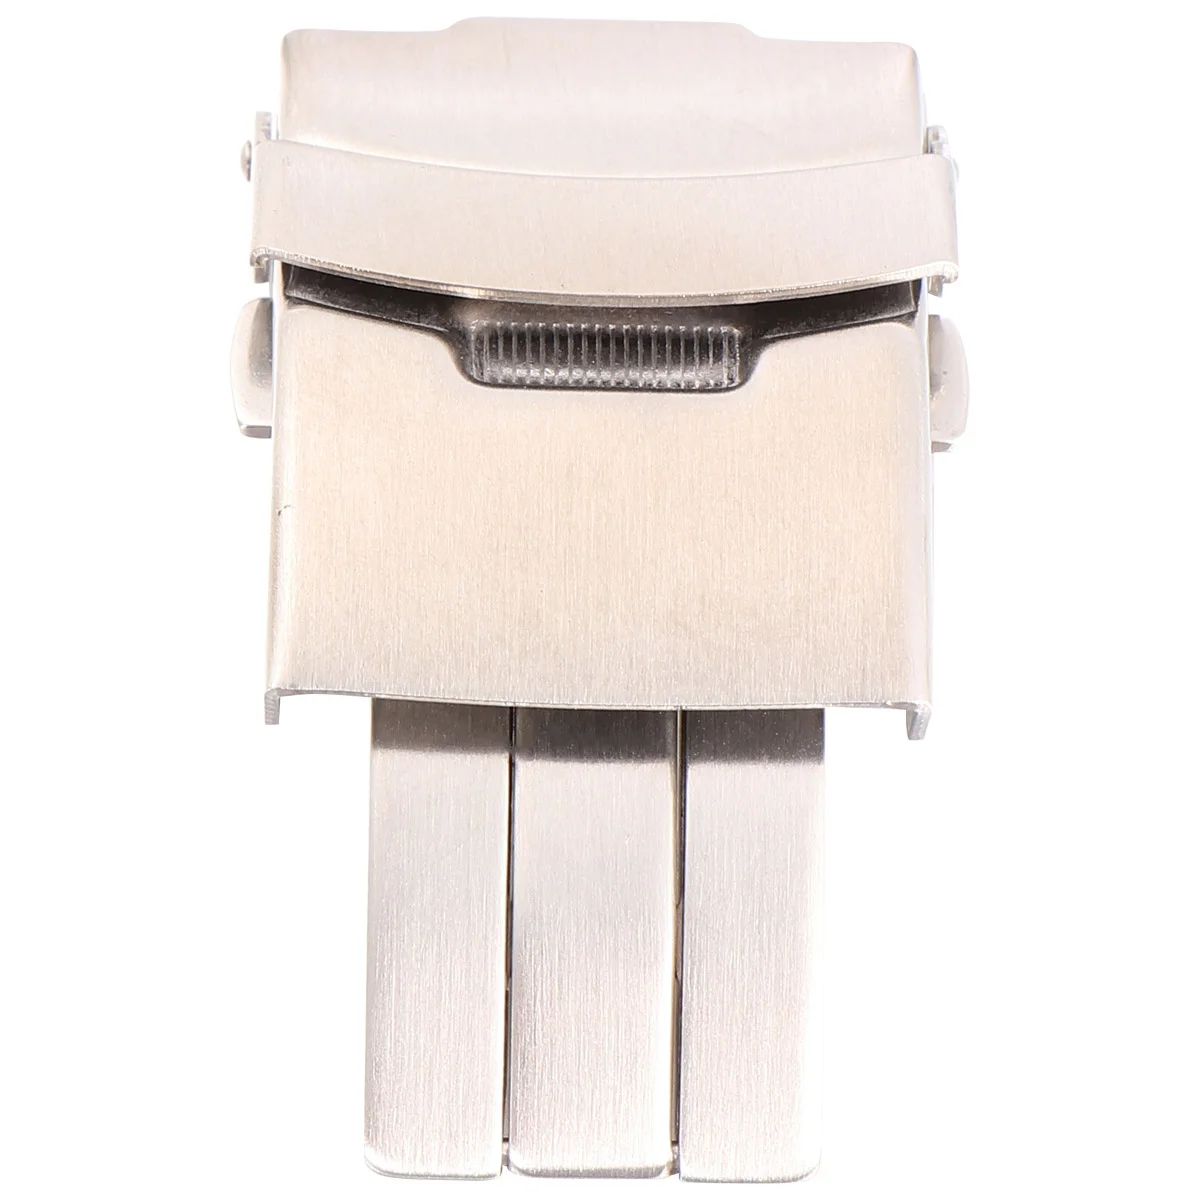 

1PC 22mm Steel Watch Strap Connection Buckle Stainless Steel Solid Buckle Sturdy Watch Band Clasp Delicate Watch Accessories